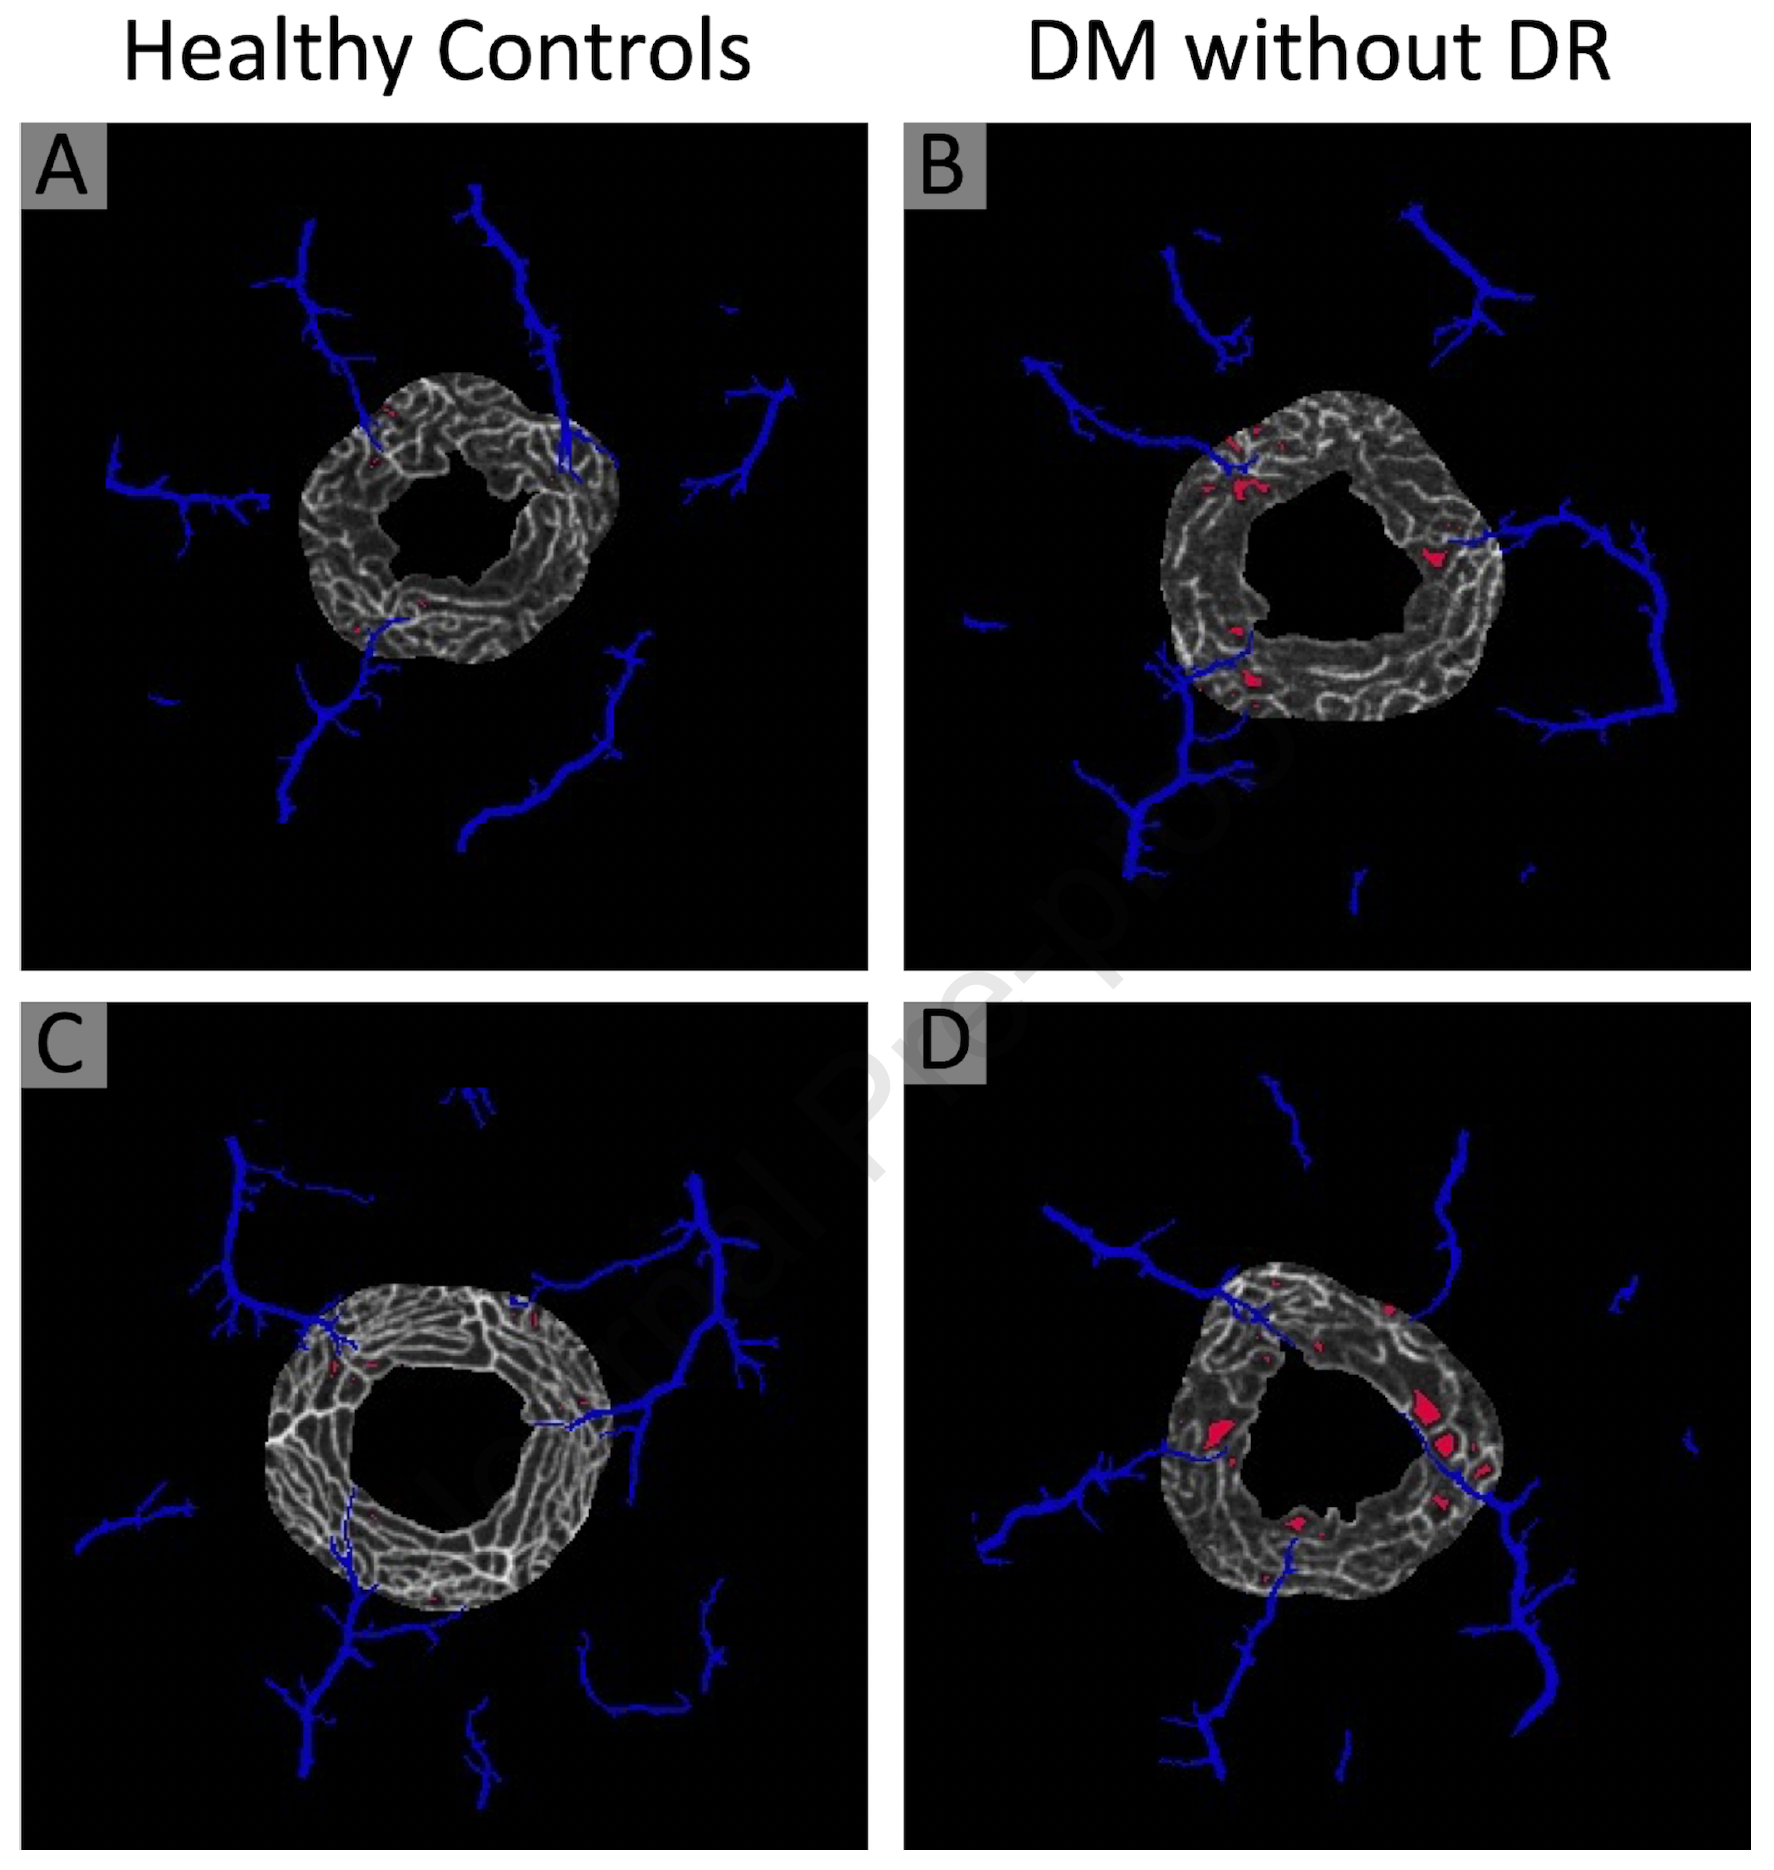 OCT angiography of patients with diabetes without diabetic retinopathy showed macular perfusion deficits were significantly increased in the perivenular deep capillaries (shown in red) compared to healthy controls. 